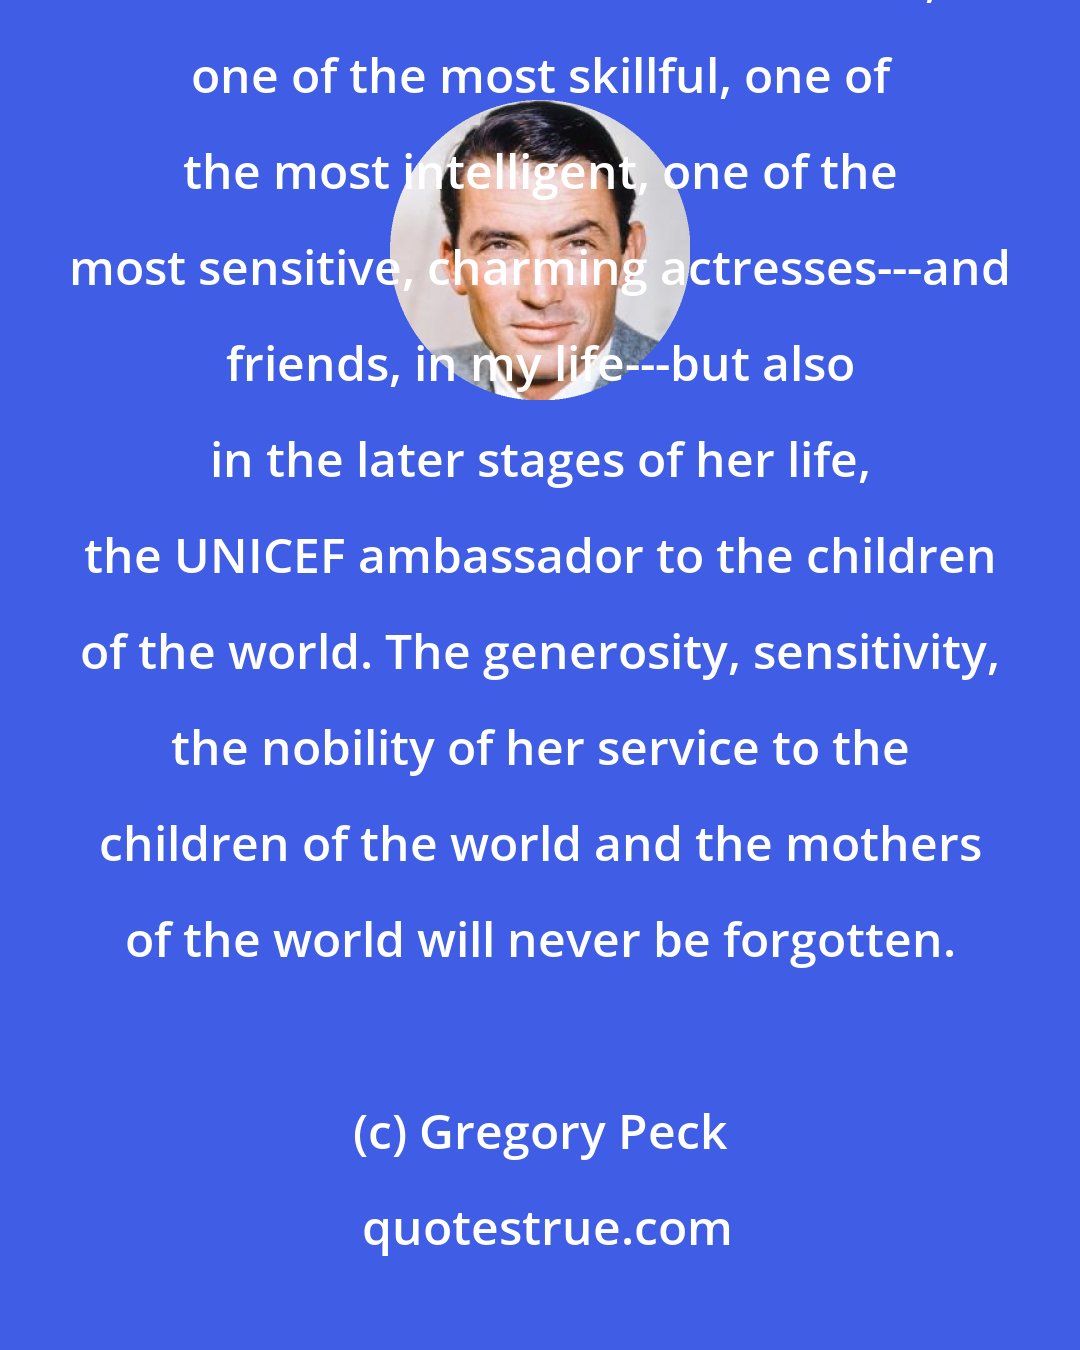 Gregory Peck: There is no doubt that the princess did become a queen---not only on the screen. One of the most loved, one of the most skillful, one of the most intelligent, one of the most sensitive, charming actresses---and friends, in my life---but also in the later stages of her life, the UNICEF ambassador to the children of the world. The generosity, sensitivity, the nobility of her service to the children of the world and the mothers of the world will never be forgotten.